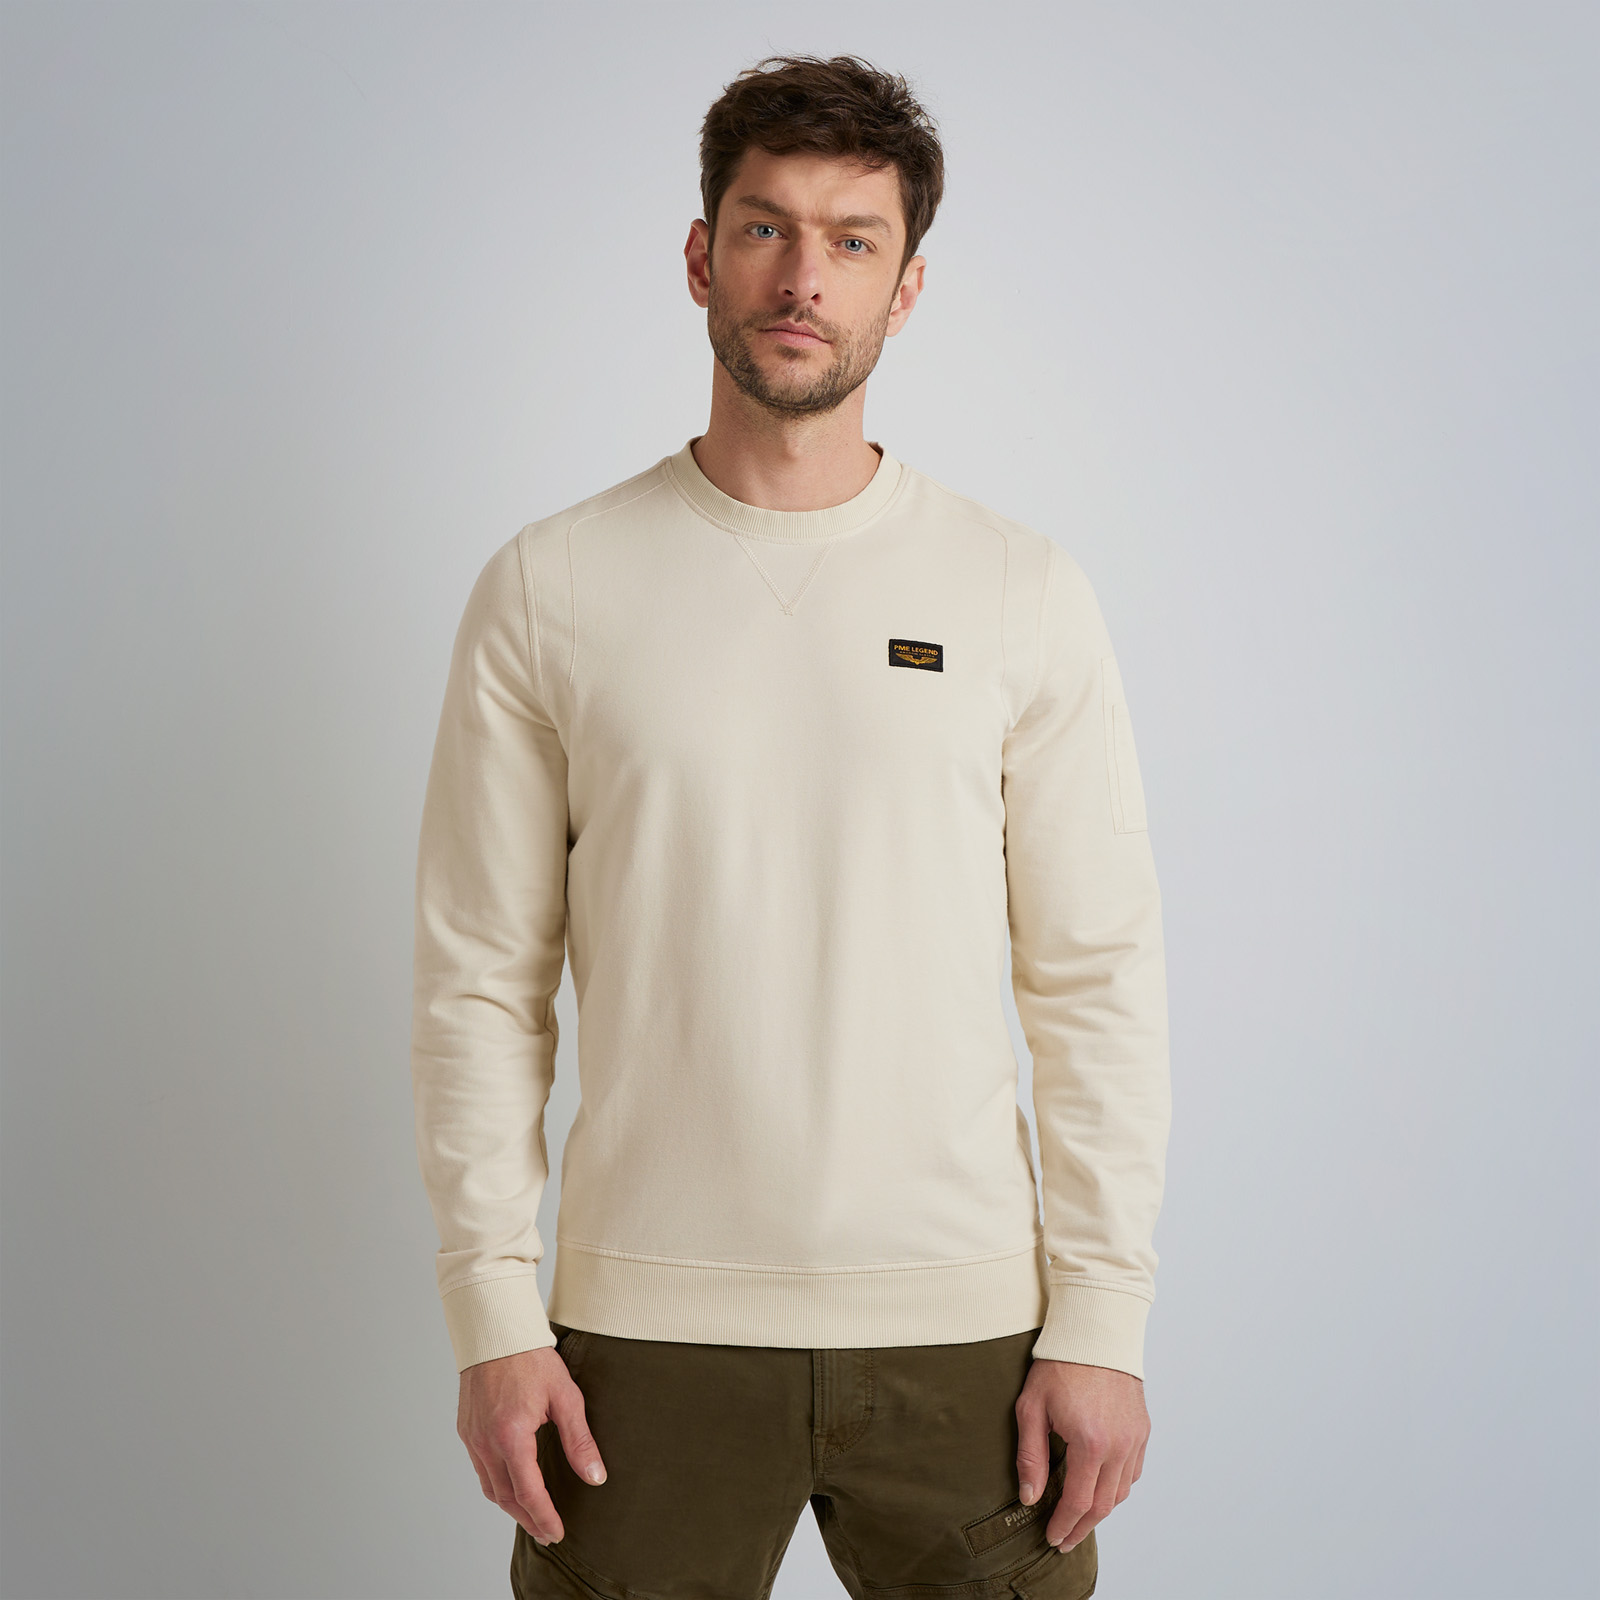 PME LEGEND | Airstrip Light Sweater | Free delivery